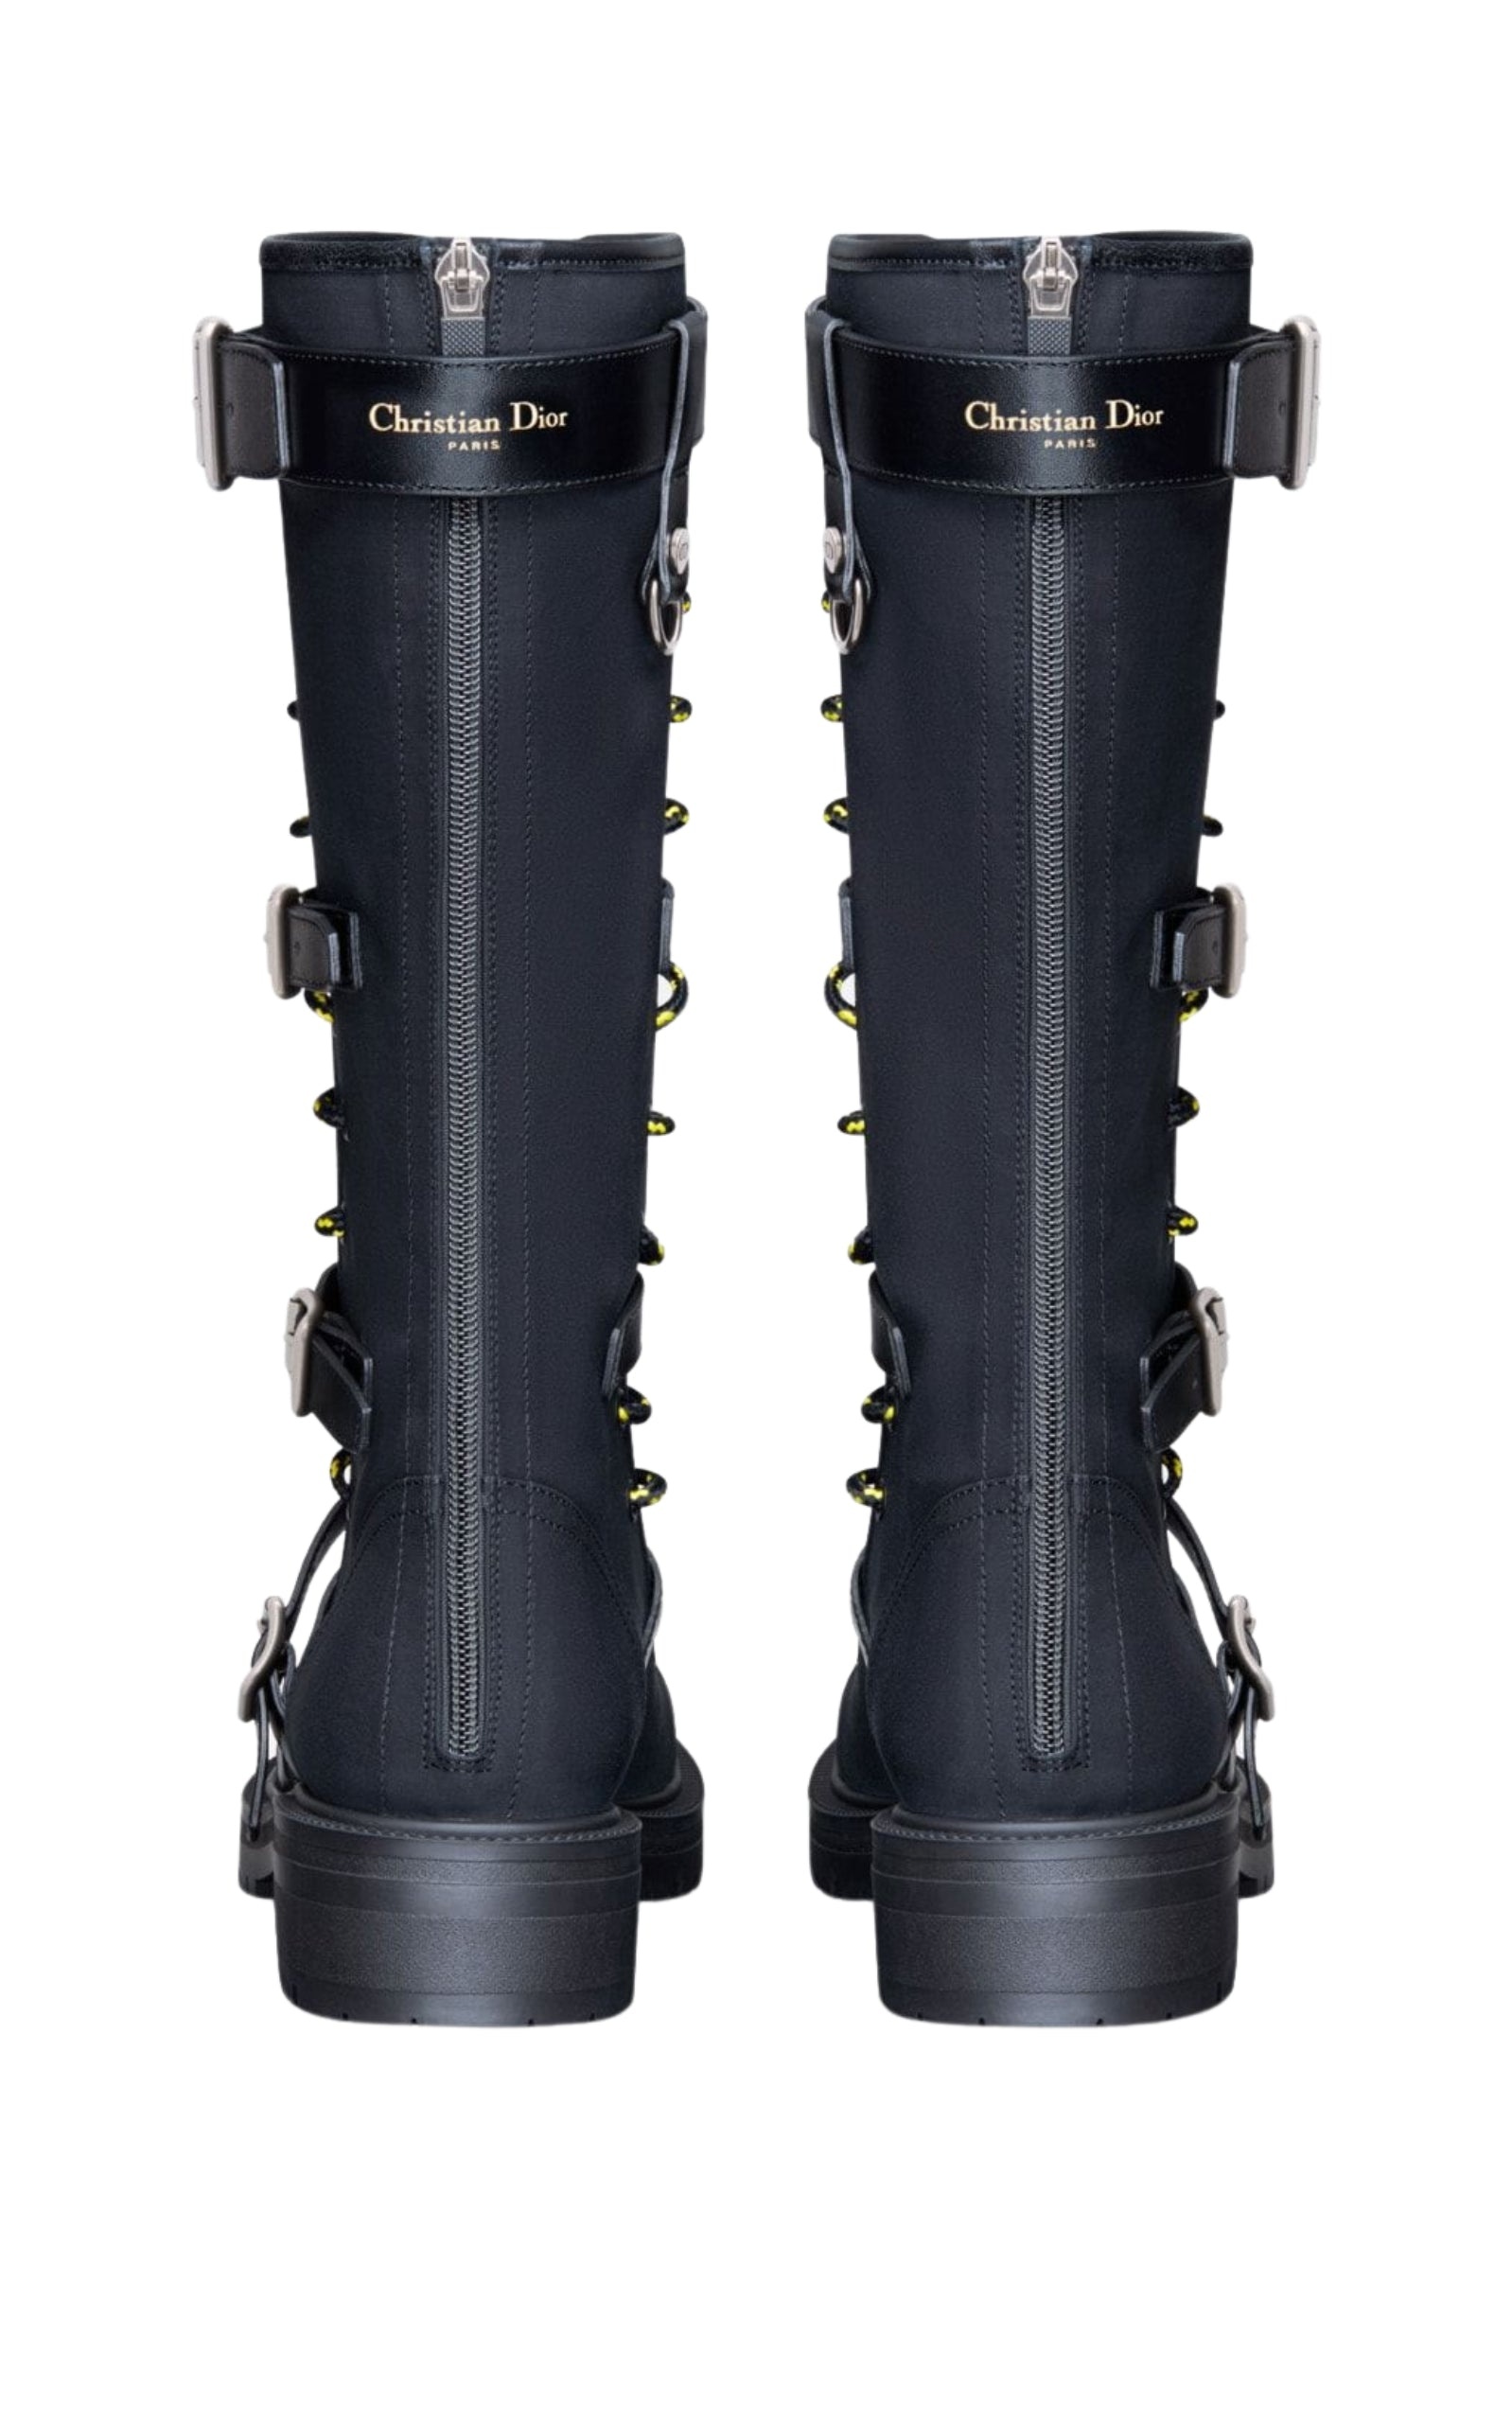 Dioranger Boots in Black Technical Fabric - 5